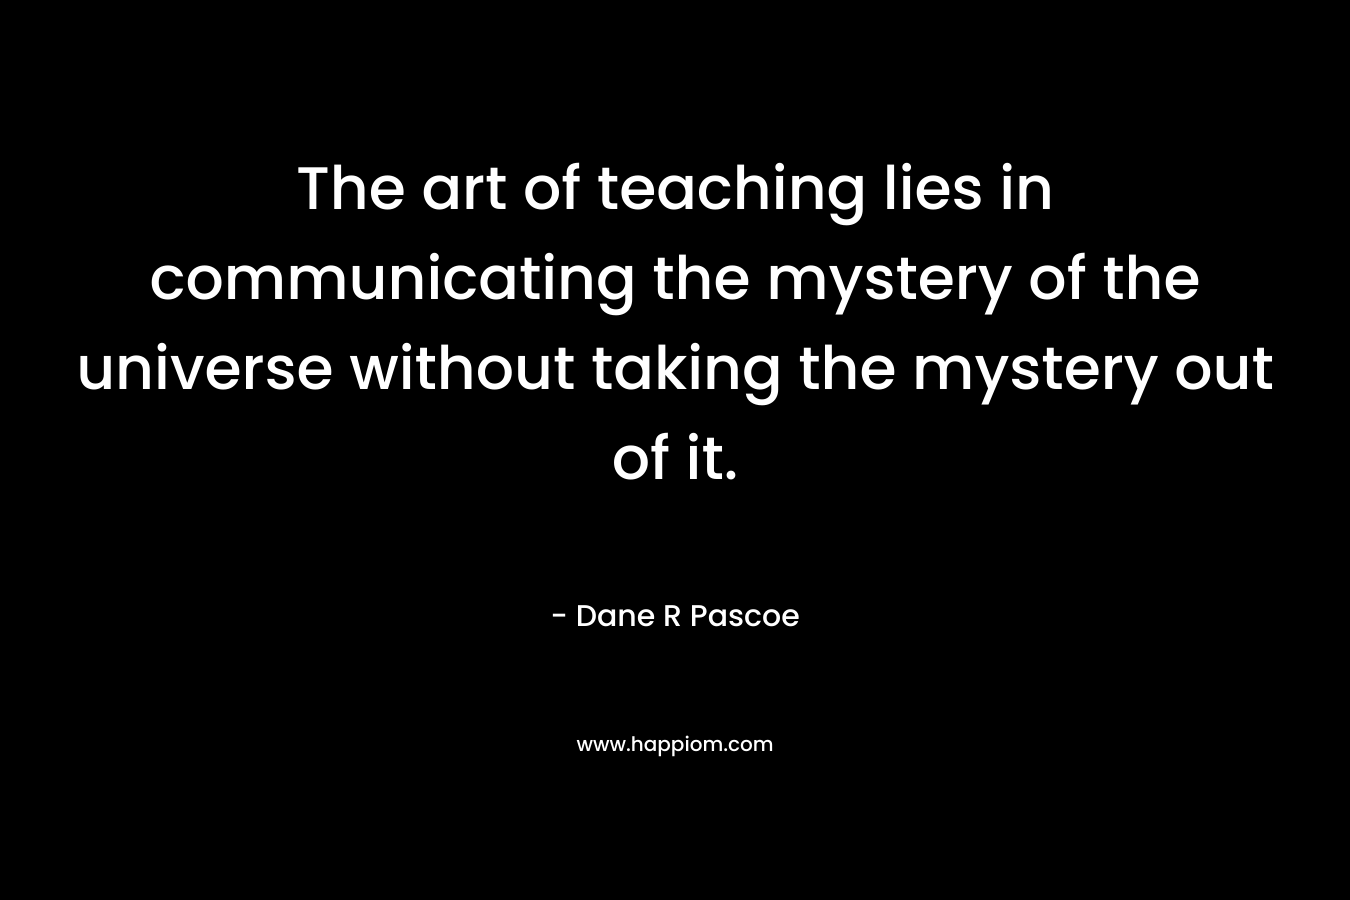 The art of teaching lies in communicating the mystery of the universe without taking the mystery out of it.